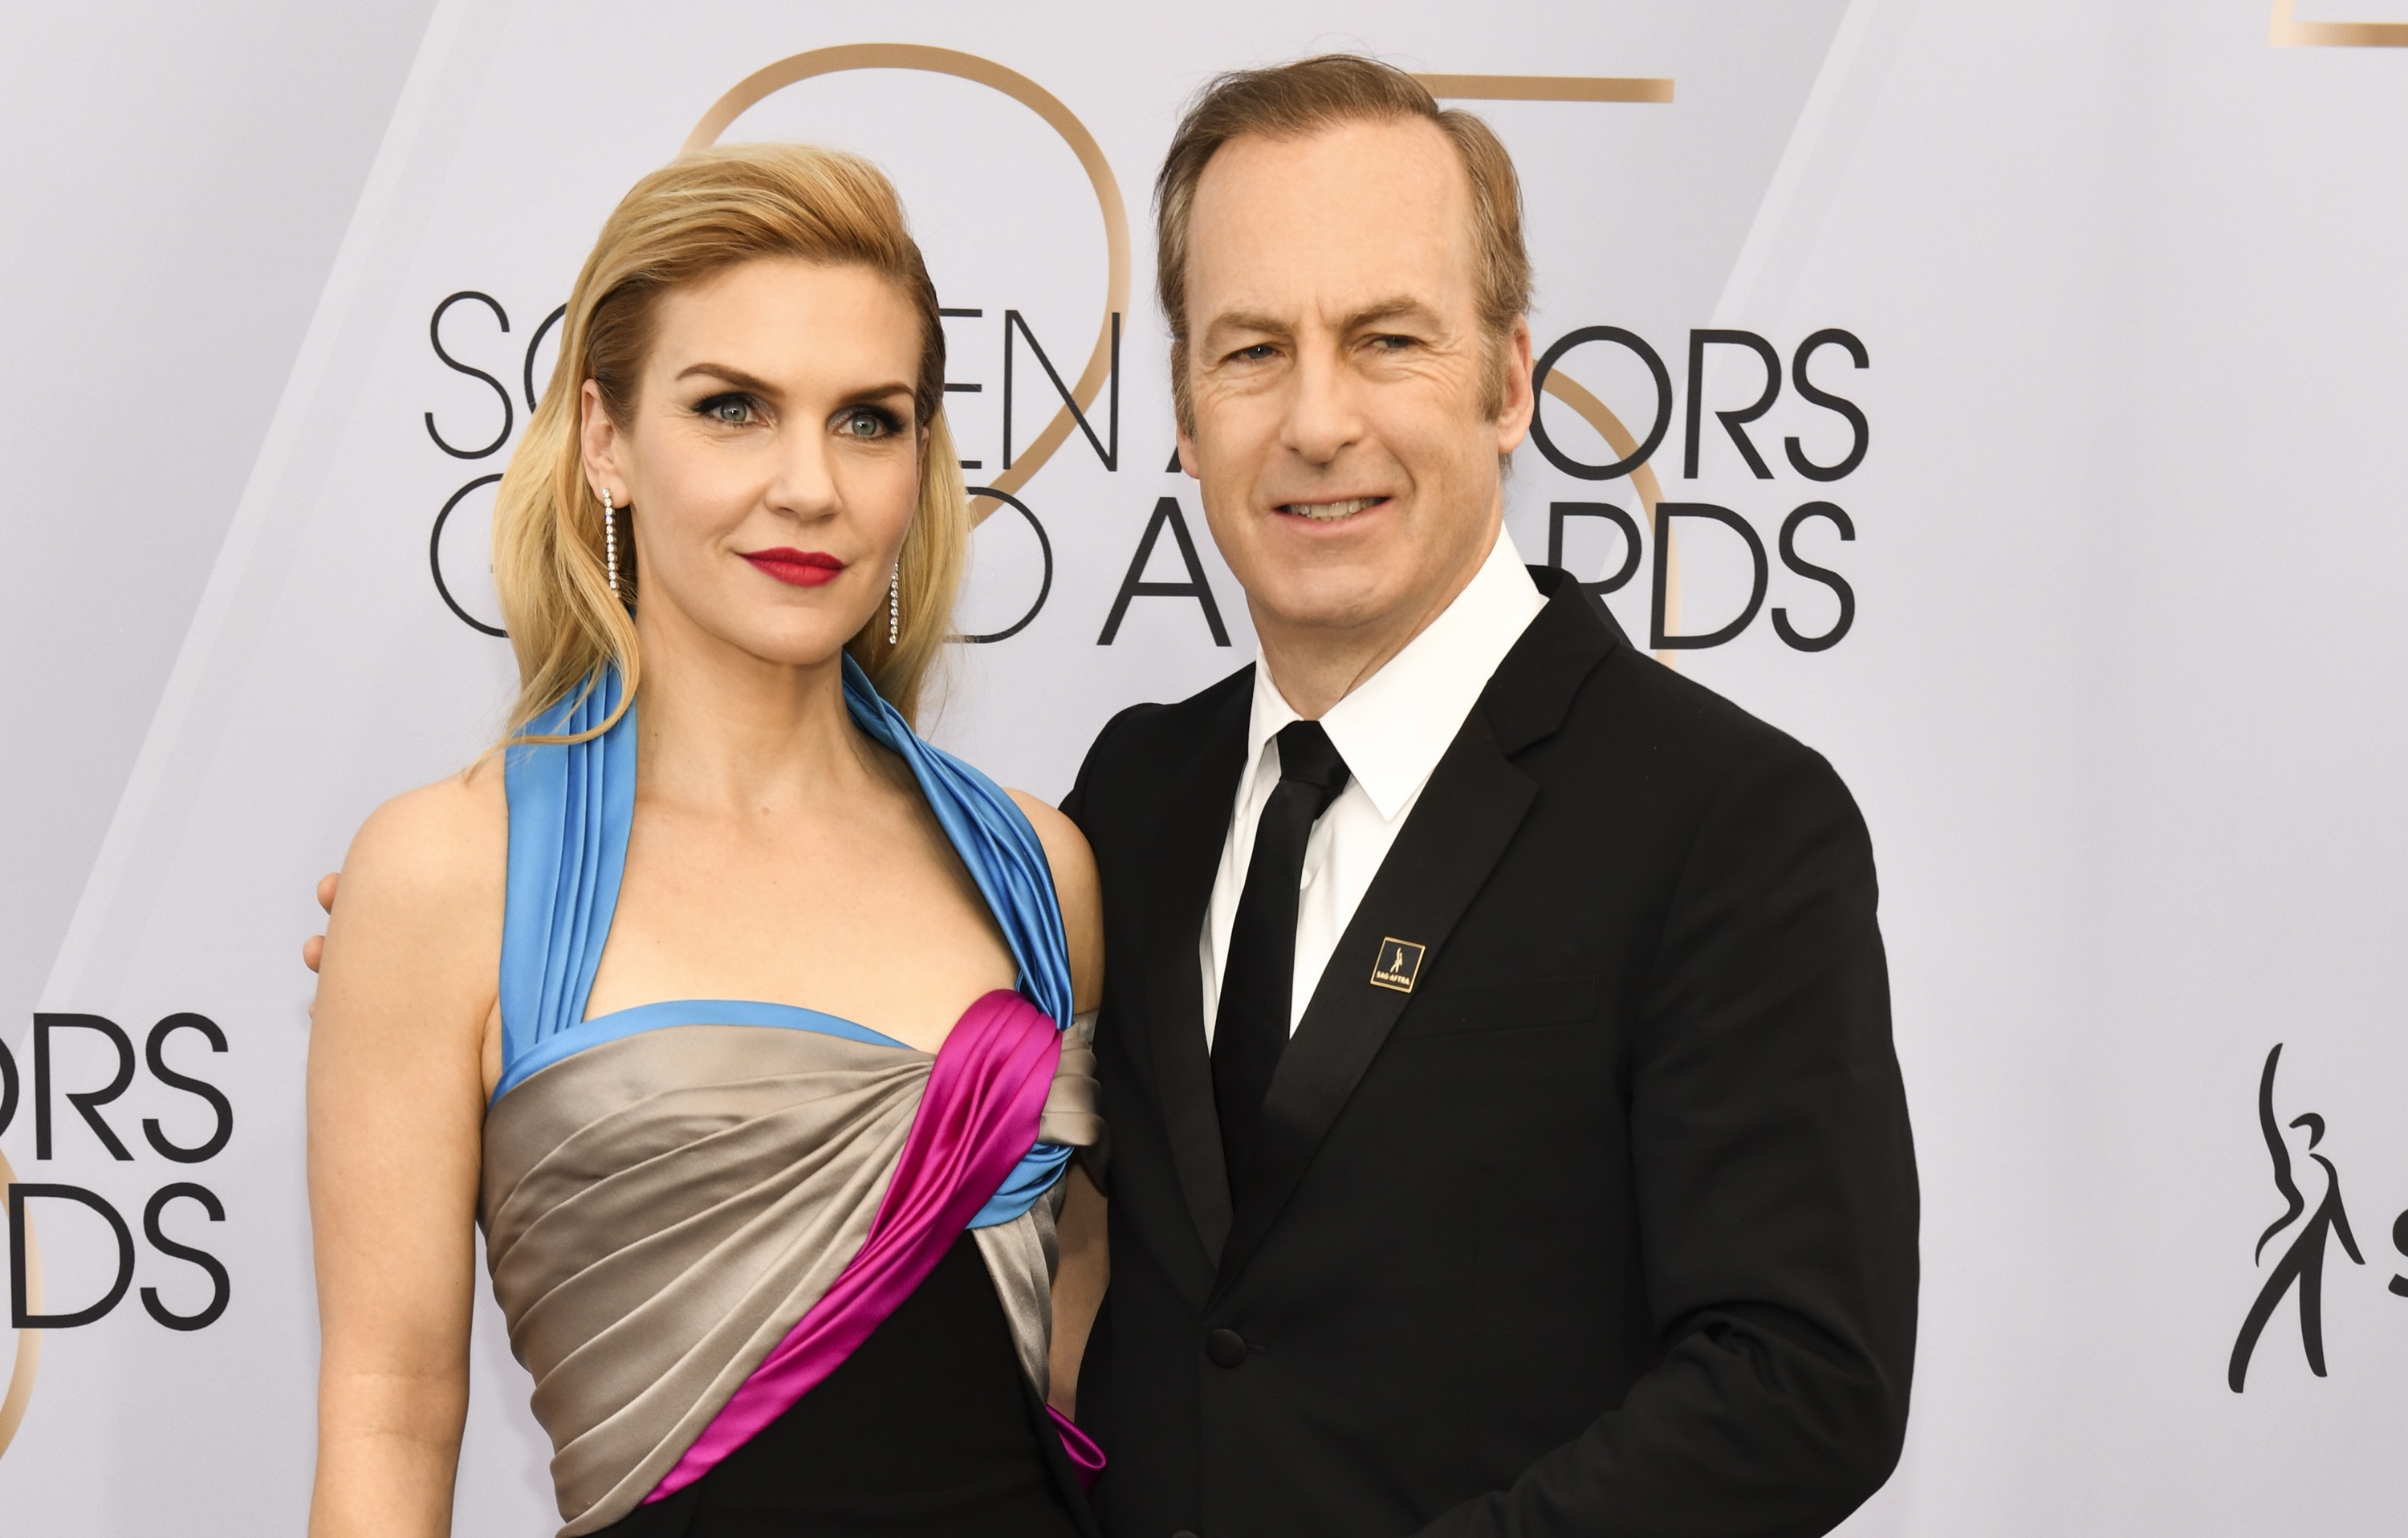 'Better Call Saul' cast members Rhea Seehorn and Bob Odenkirk posing for photographers at the 25th Annual Screen Actors Guild Awards